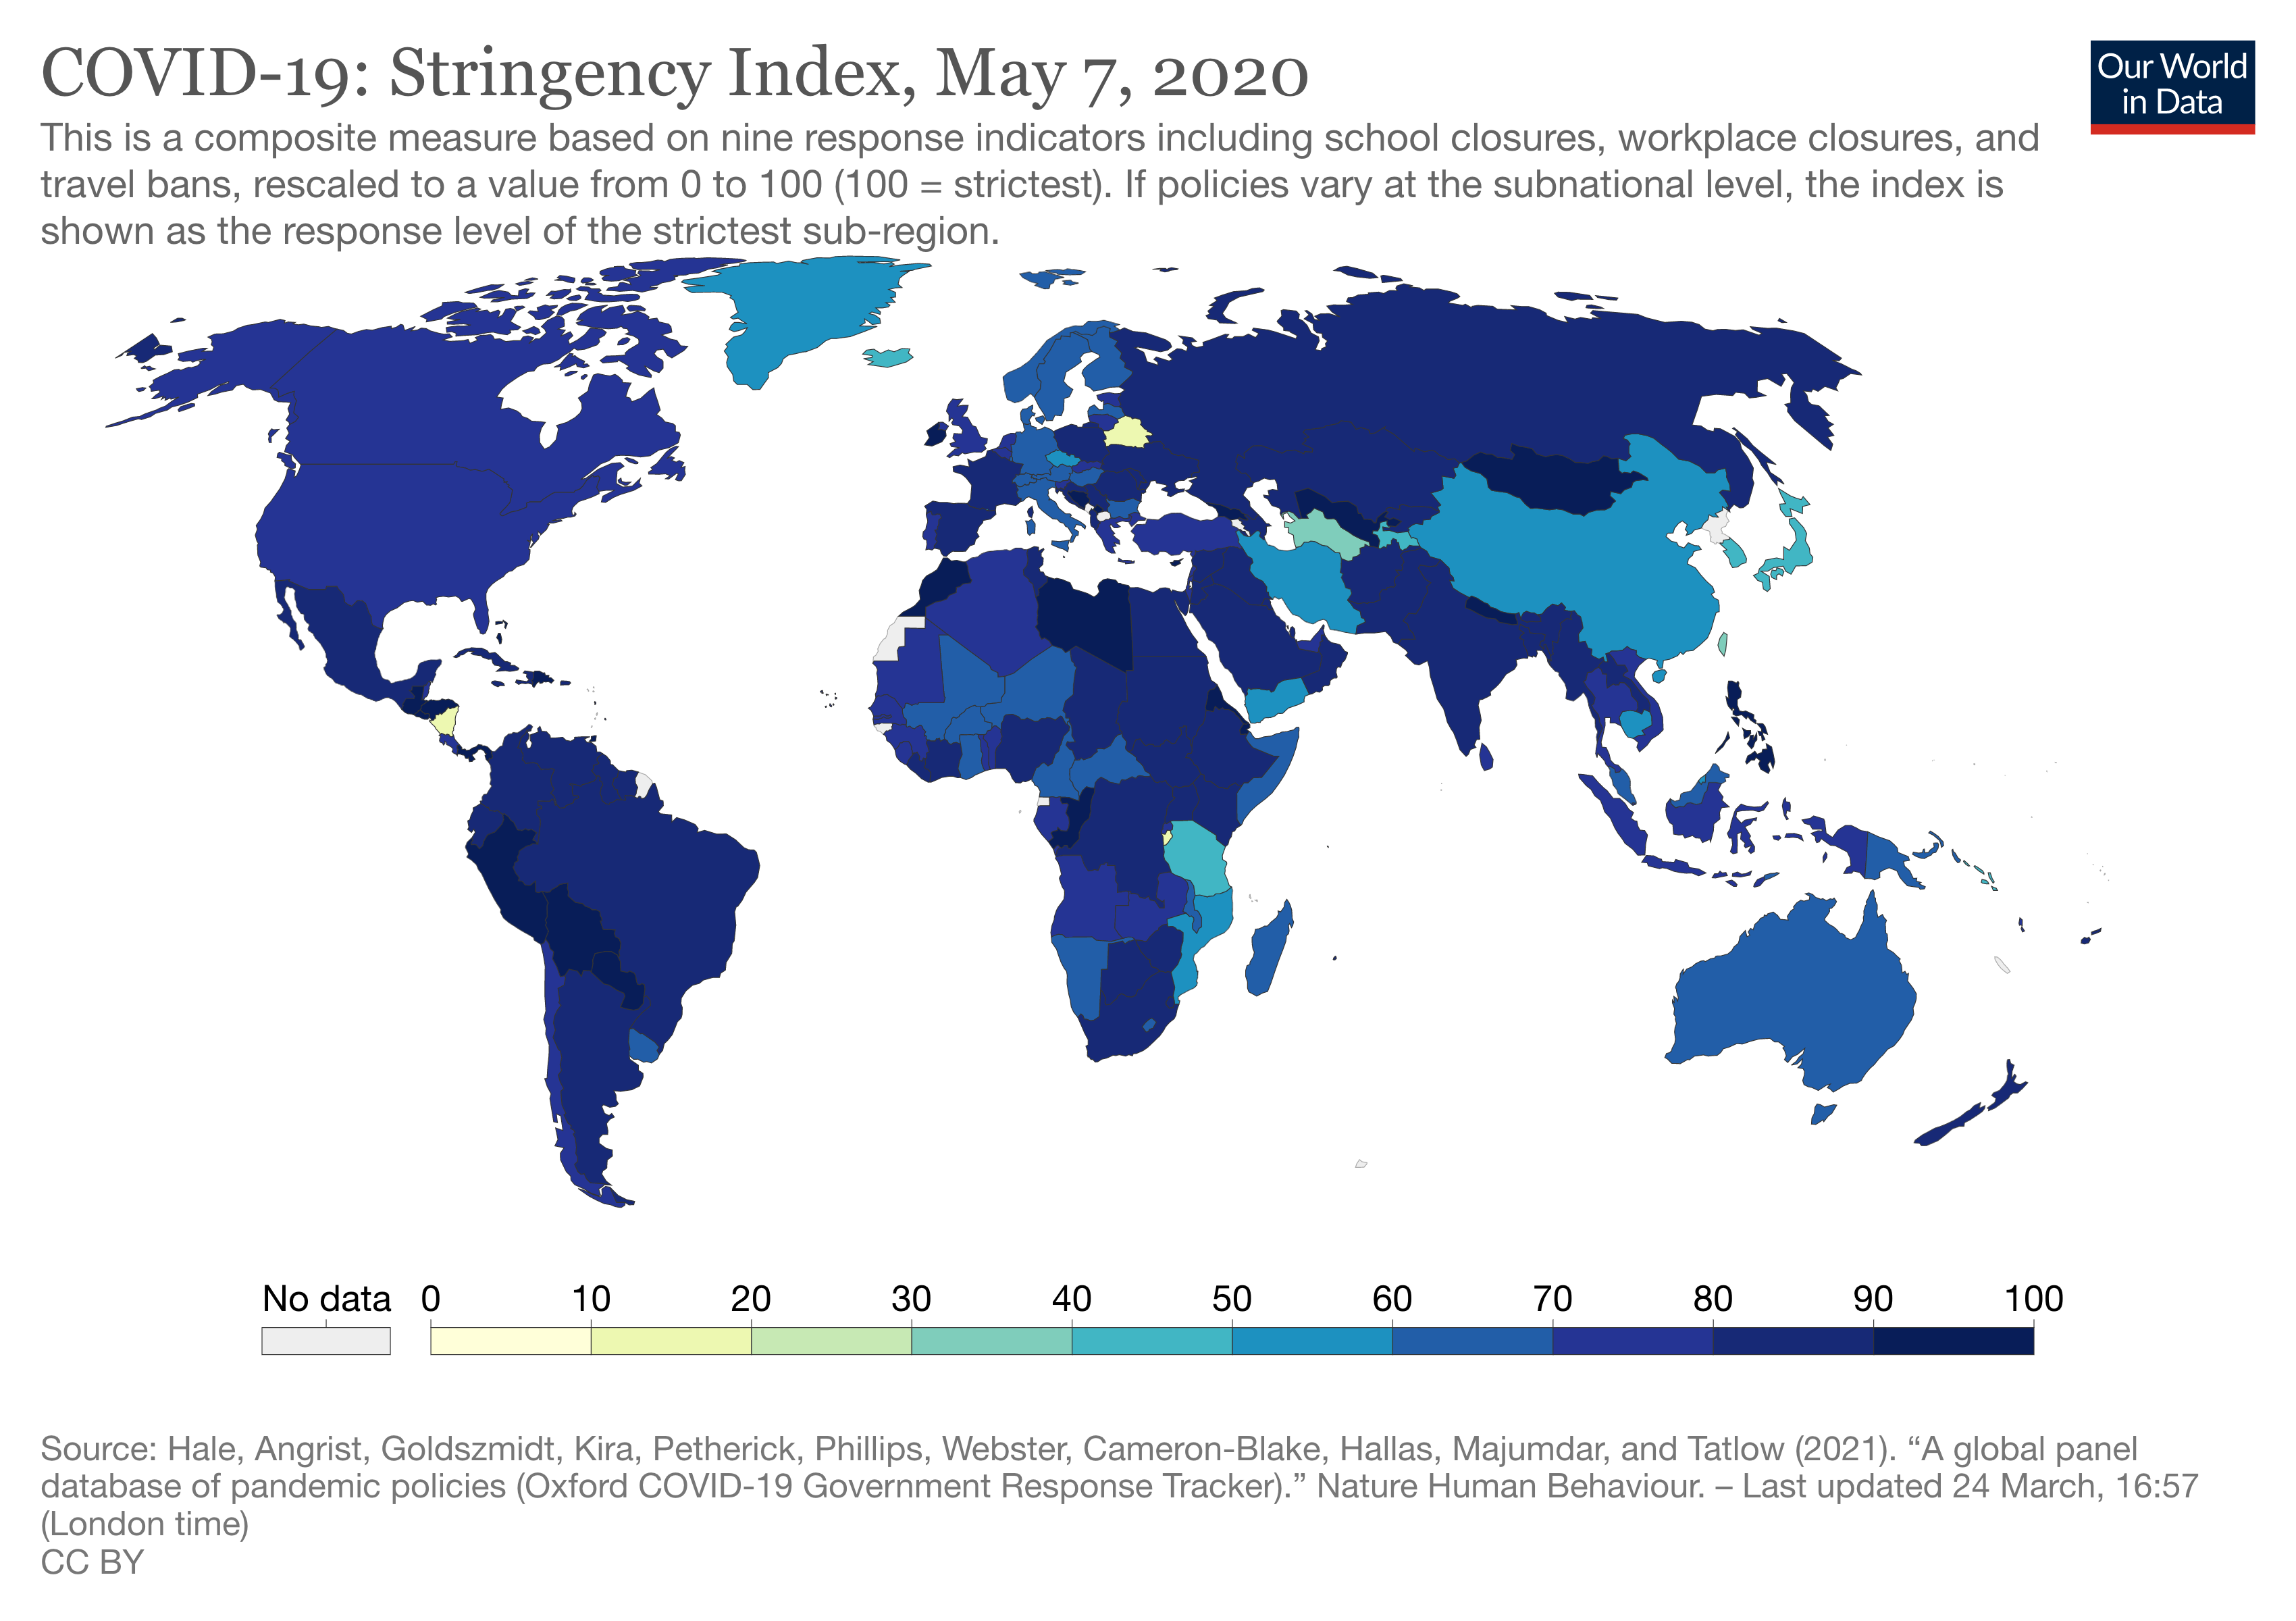 Visualisation of the "Stringency Index" showing severity of policy responses across the world.